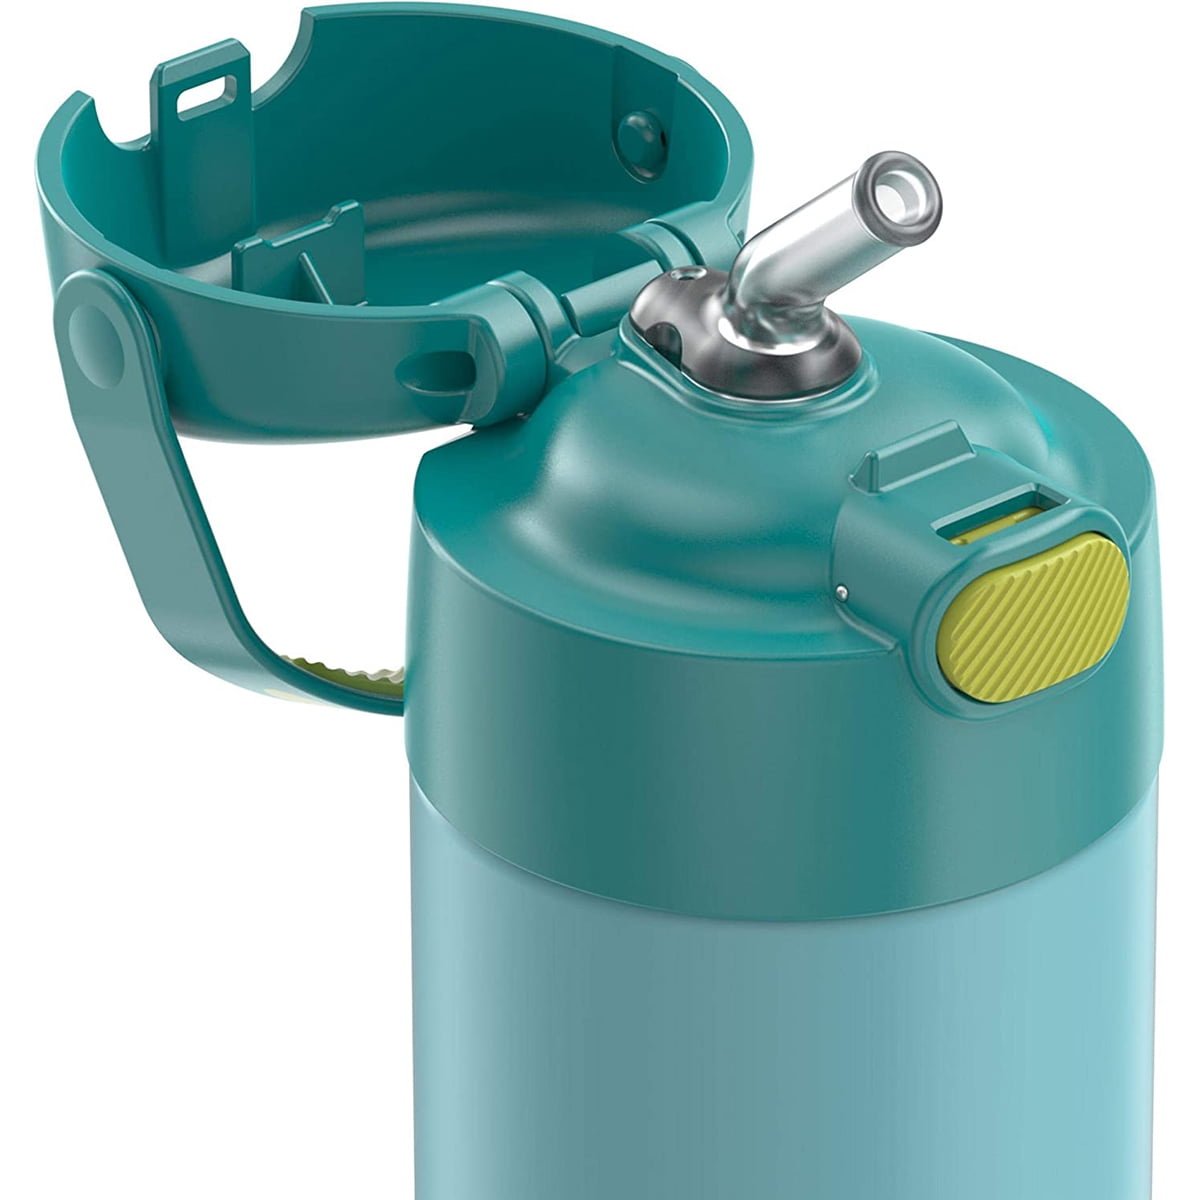 Thermos - Kids on the go? No worries! Our new FUNtainer® water bottles keep  kids hydrated all day long.